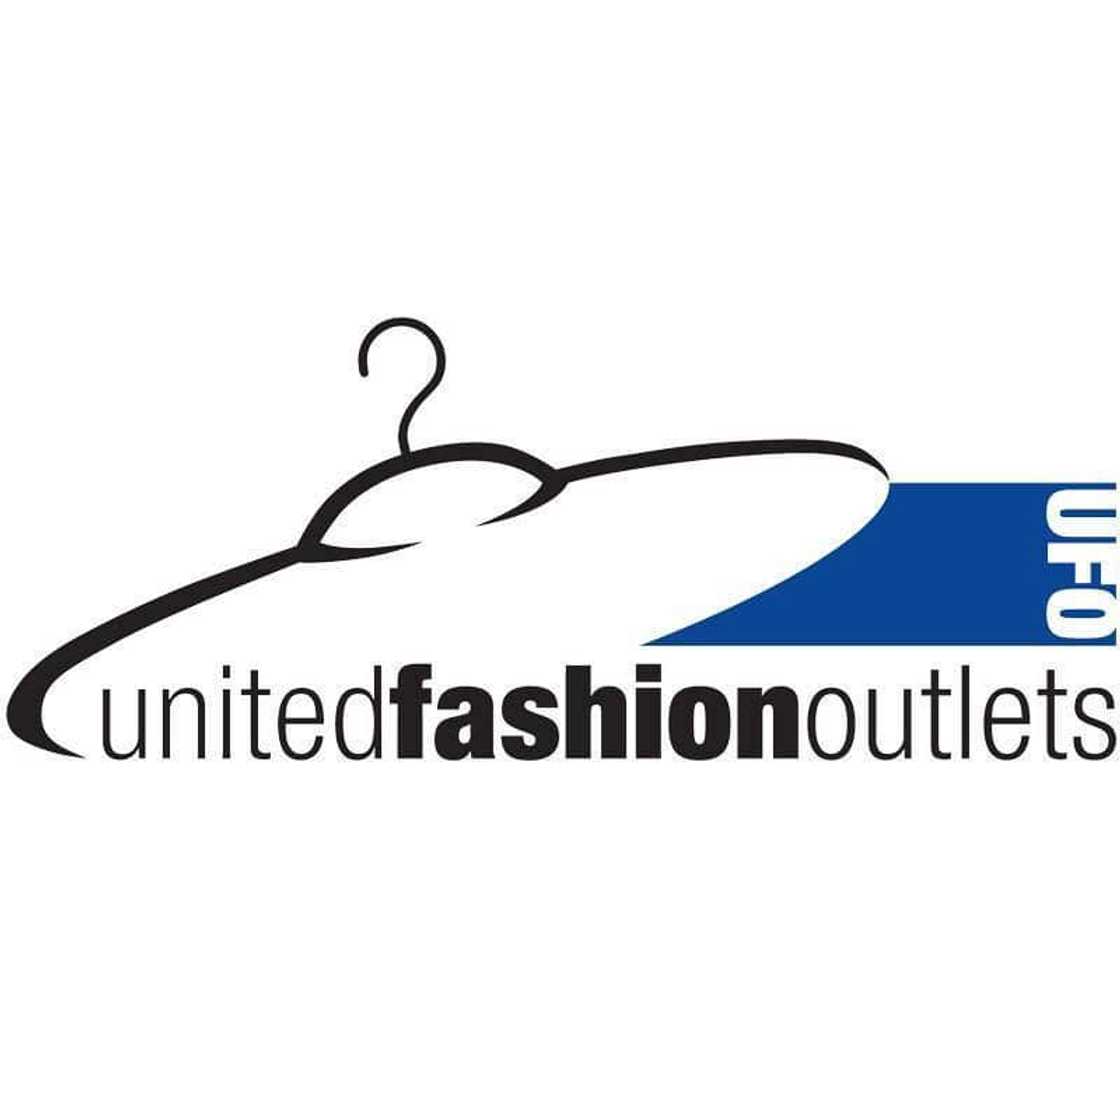 United Fashion Outlets